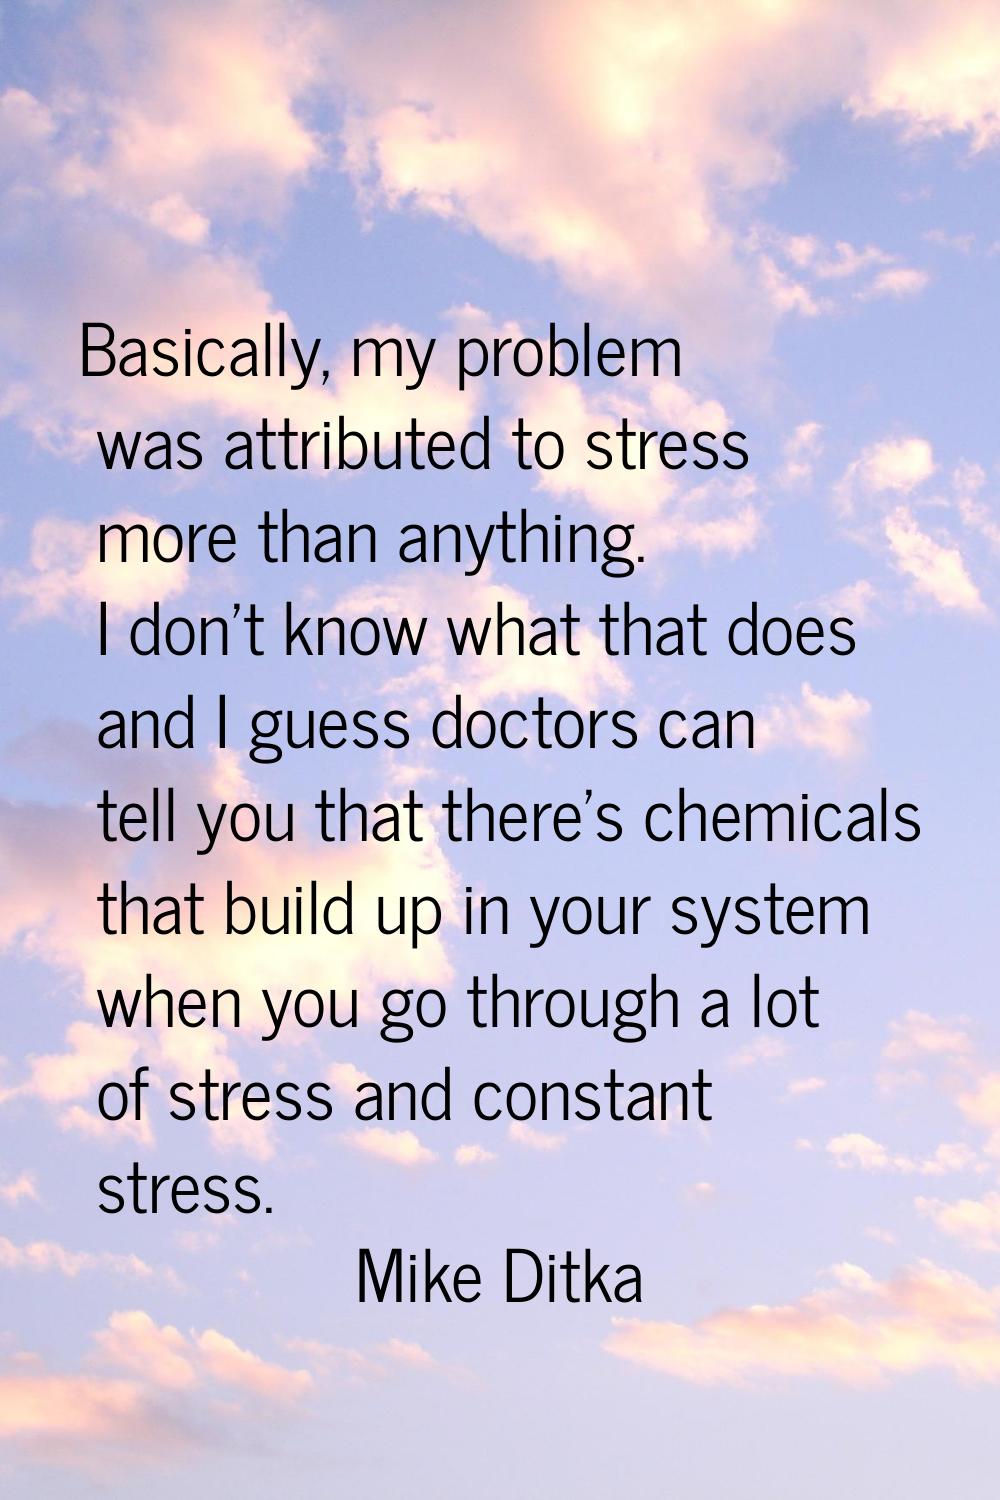 Basically, my problem was attributed to stress more than anything. I don't know what that does and 